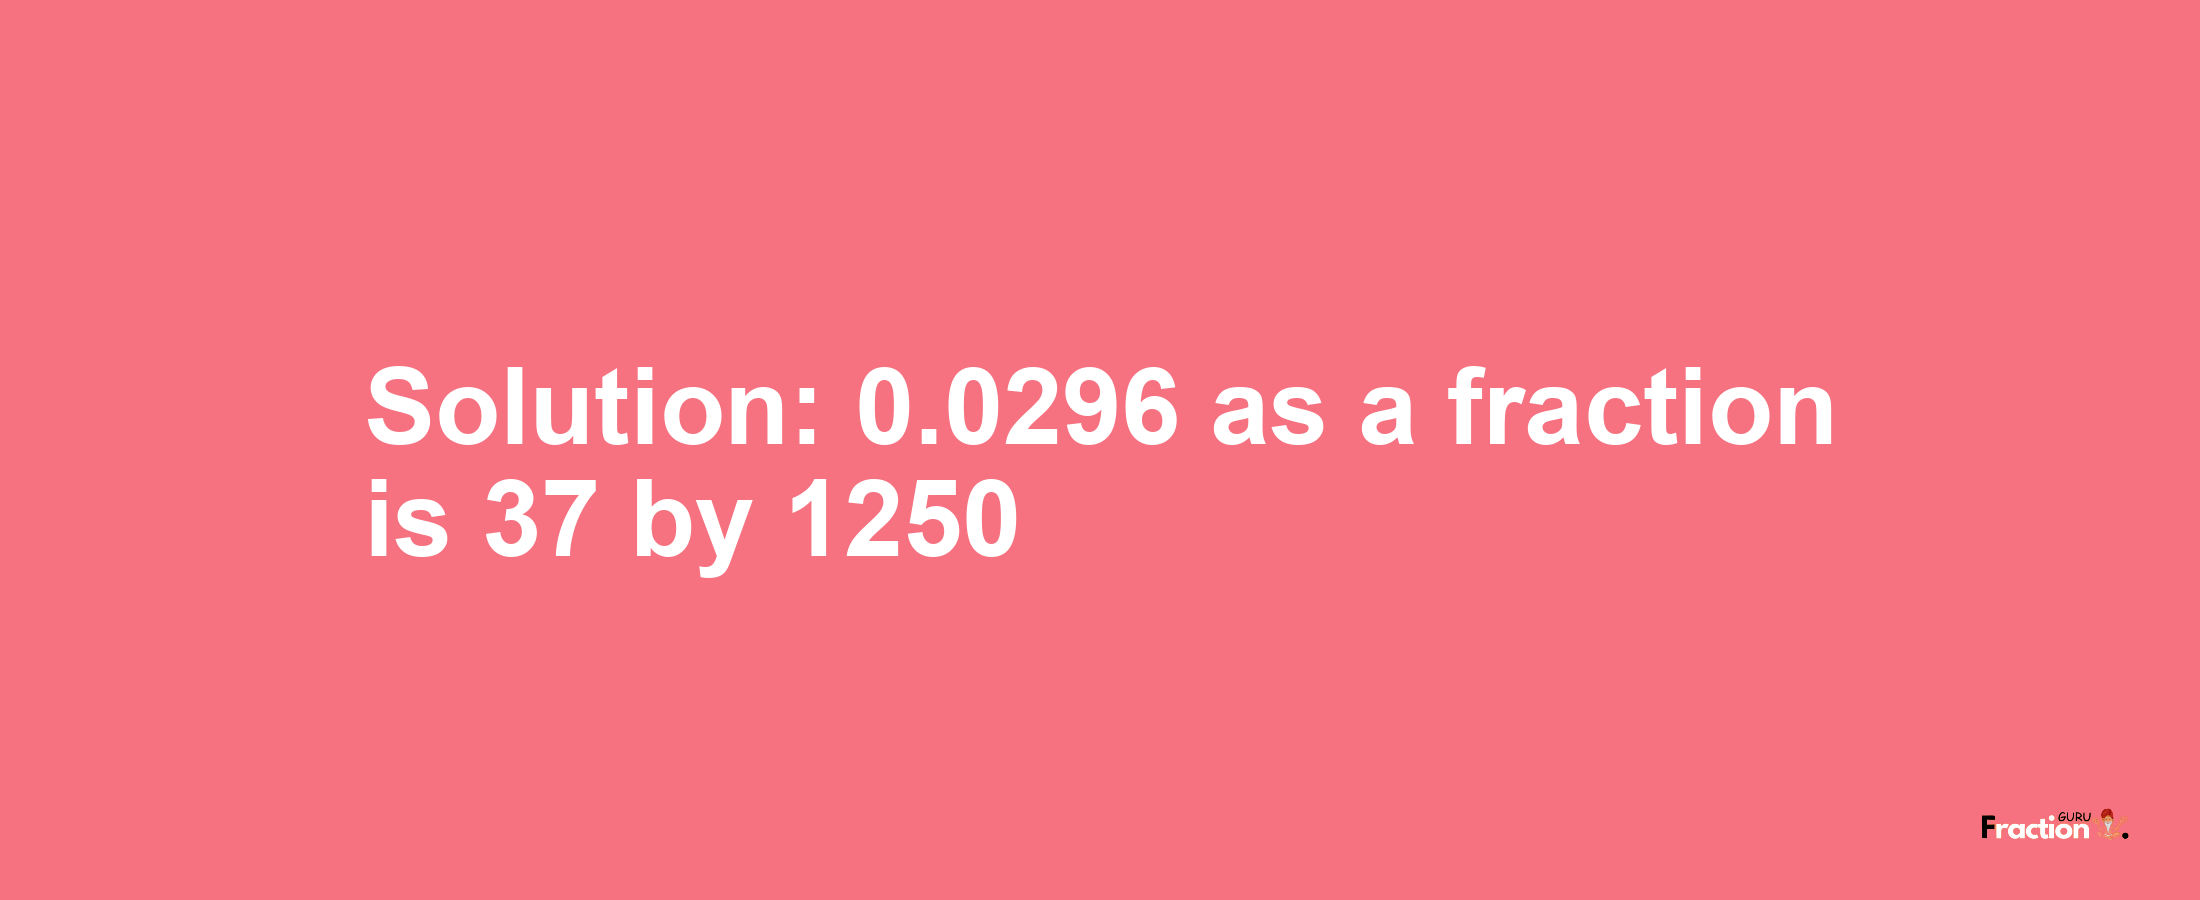 Solution:0.0296 as a fraction is 37/1250